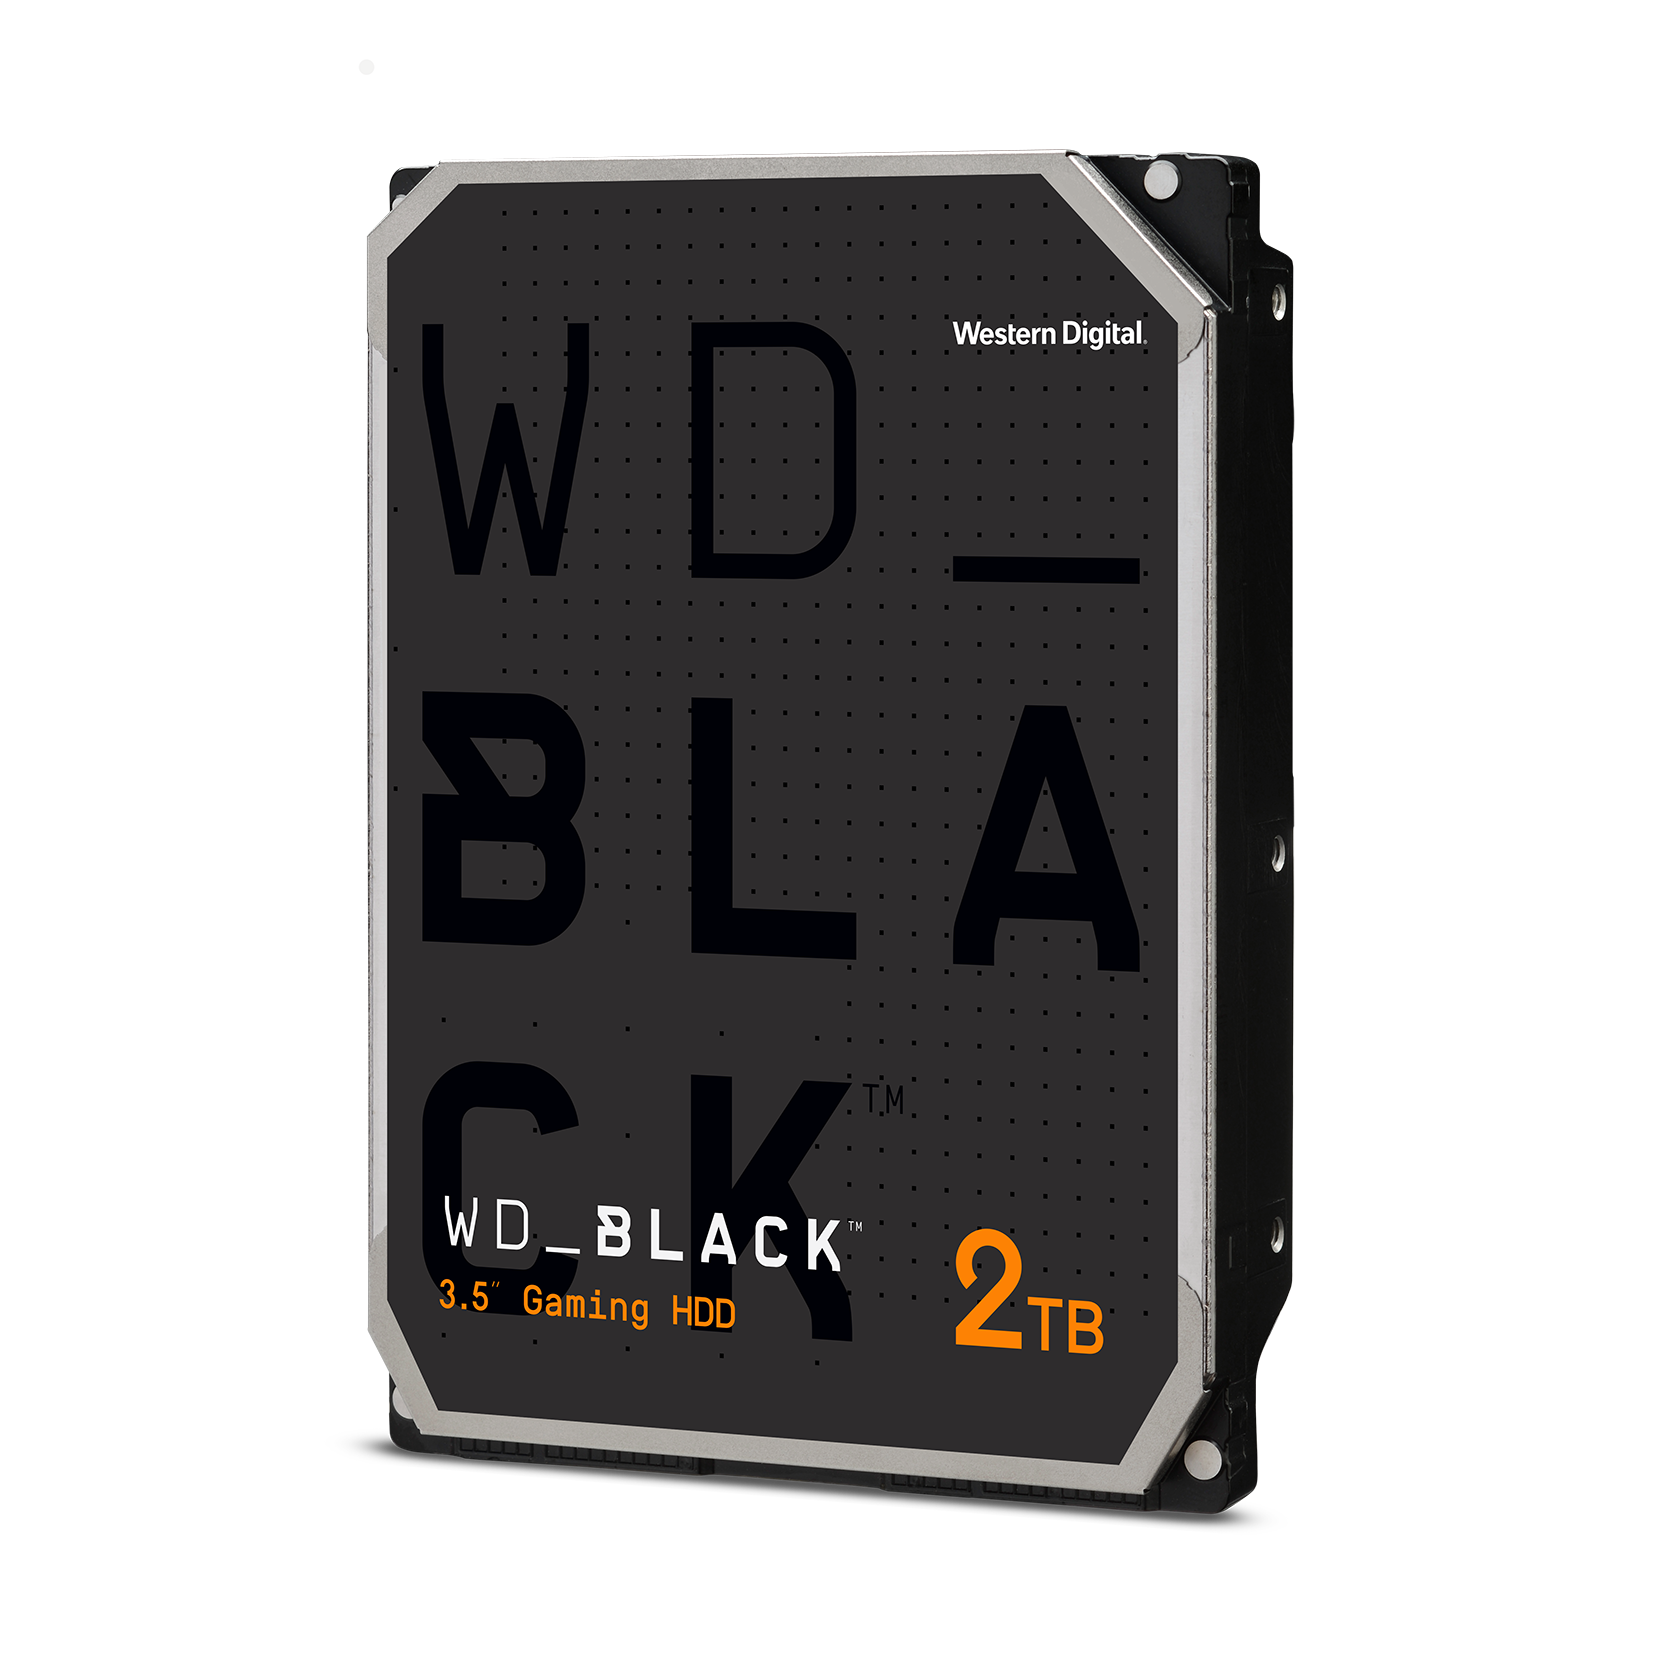 WD_BLACK 2TB 3.5'' Internal Gaming Hard Drive, 64MB Cache - WD2003FZEX - image 1 of 5